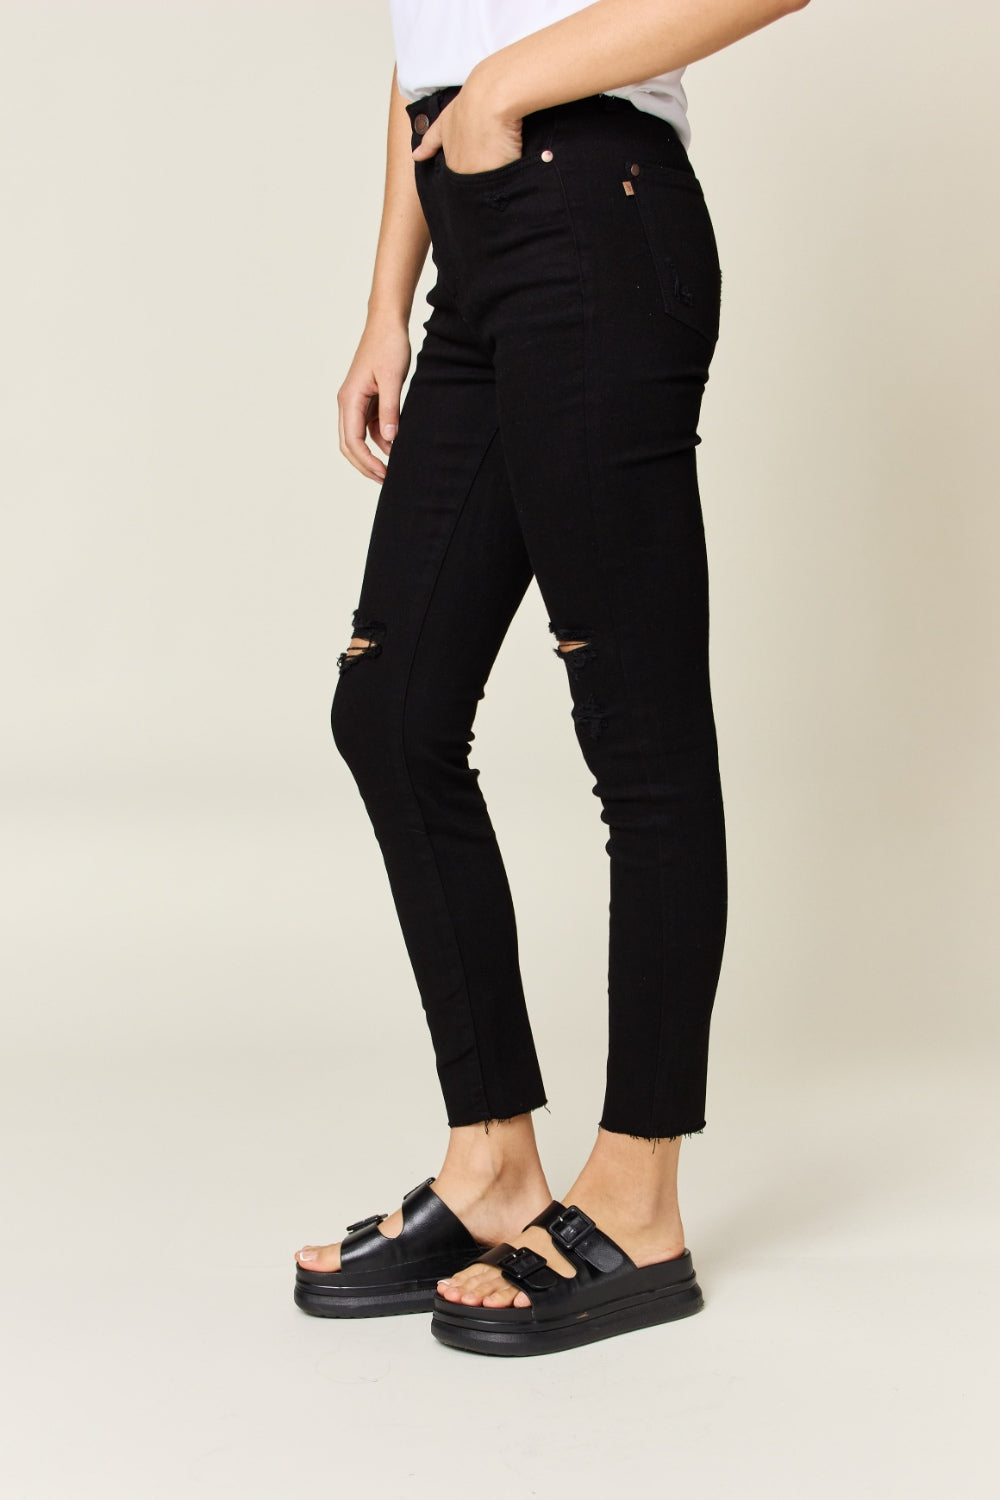 Shop Judy Blue Skinny Jeans for ultimate style & comfort. Flattering high-waist design with tummy control and trendy distressed details.